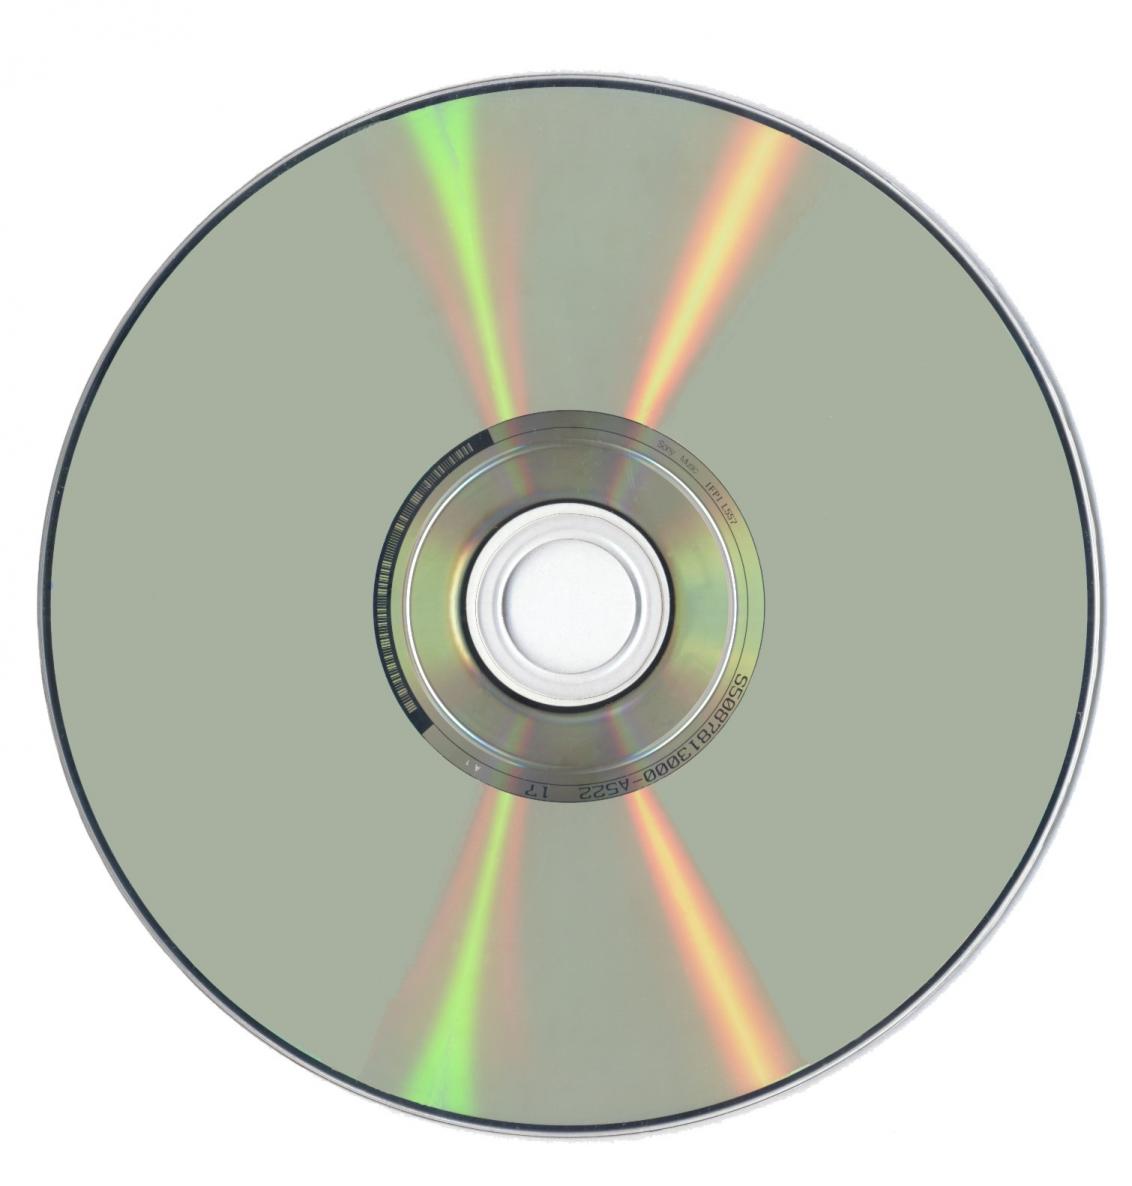 How to recover MOST of scratched CD/DVD data discs